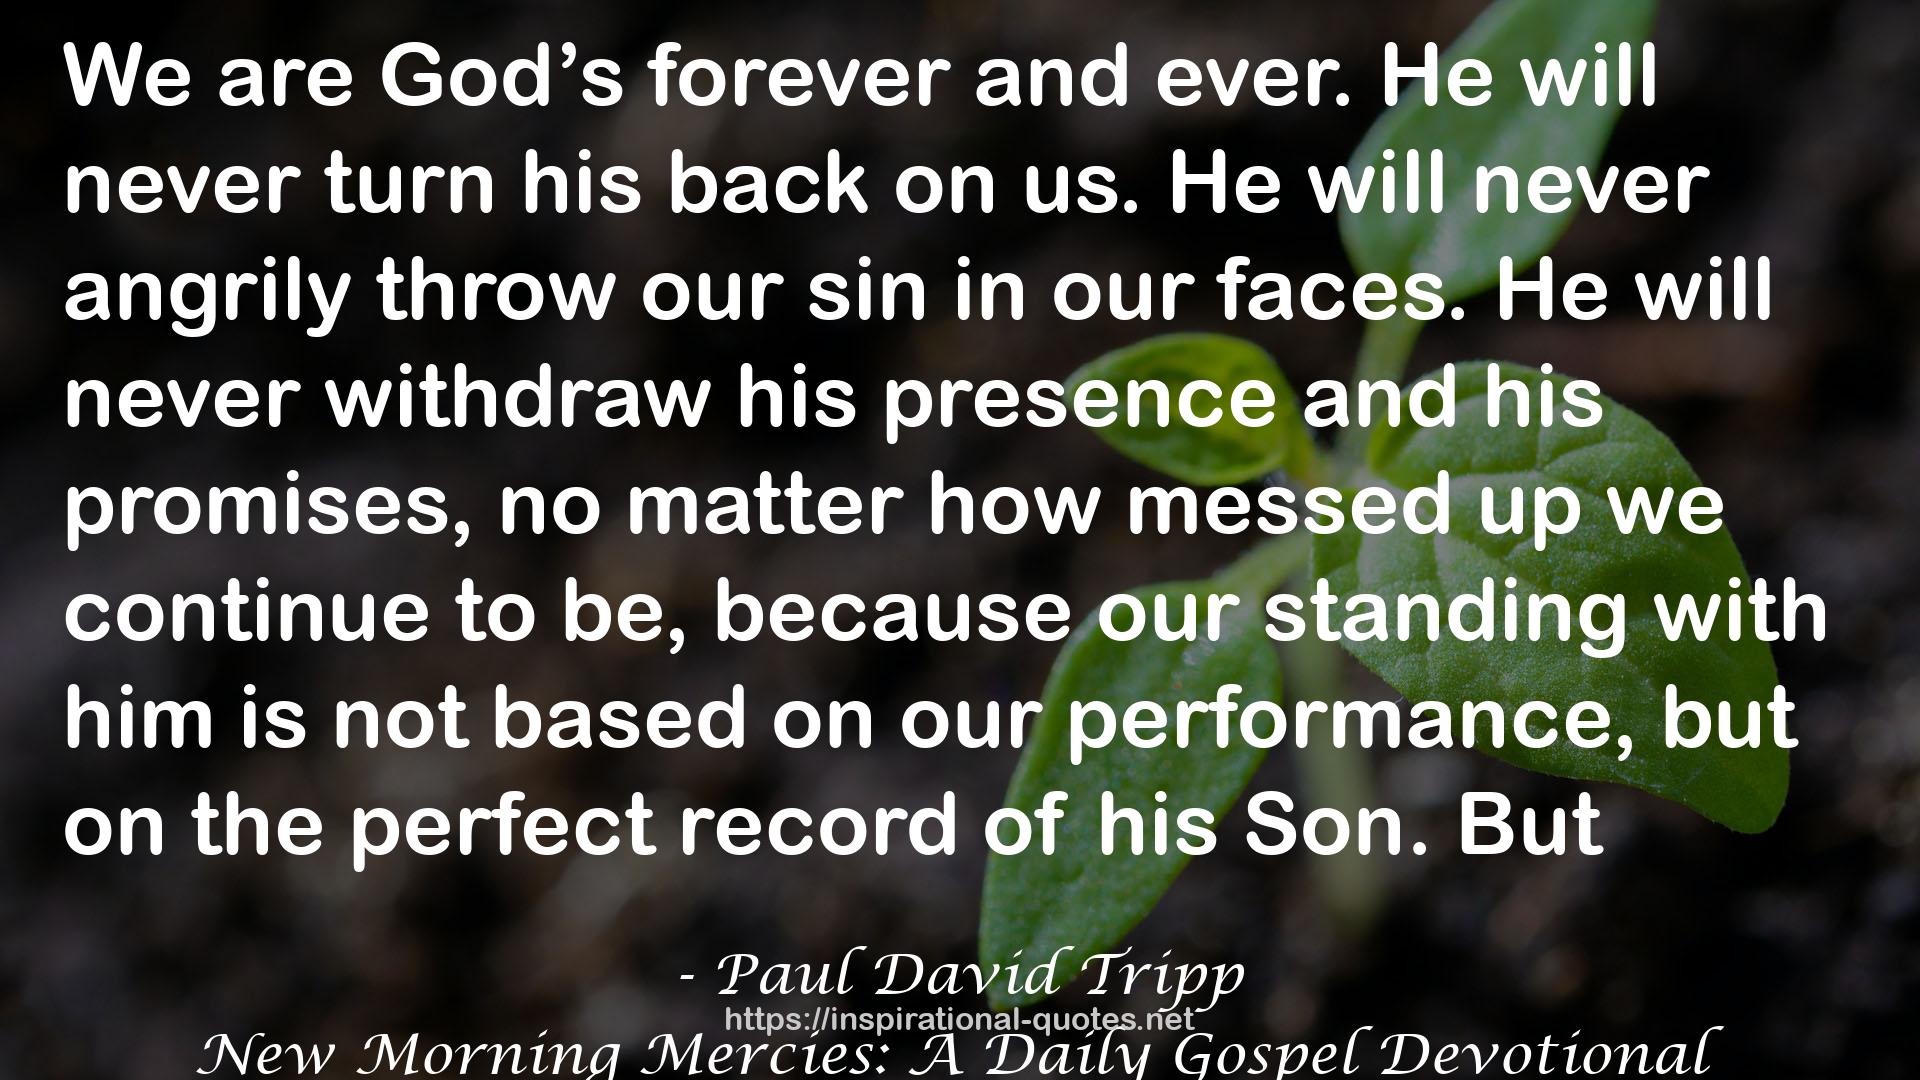 New Morning Mercies: A Daily Gospel Devotional QUOTES